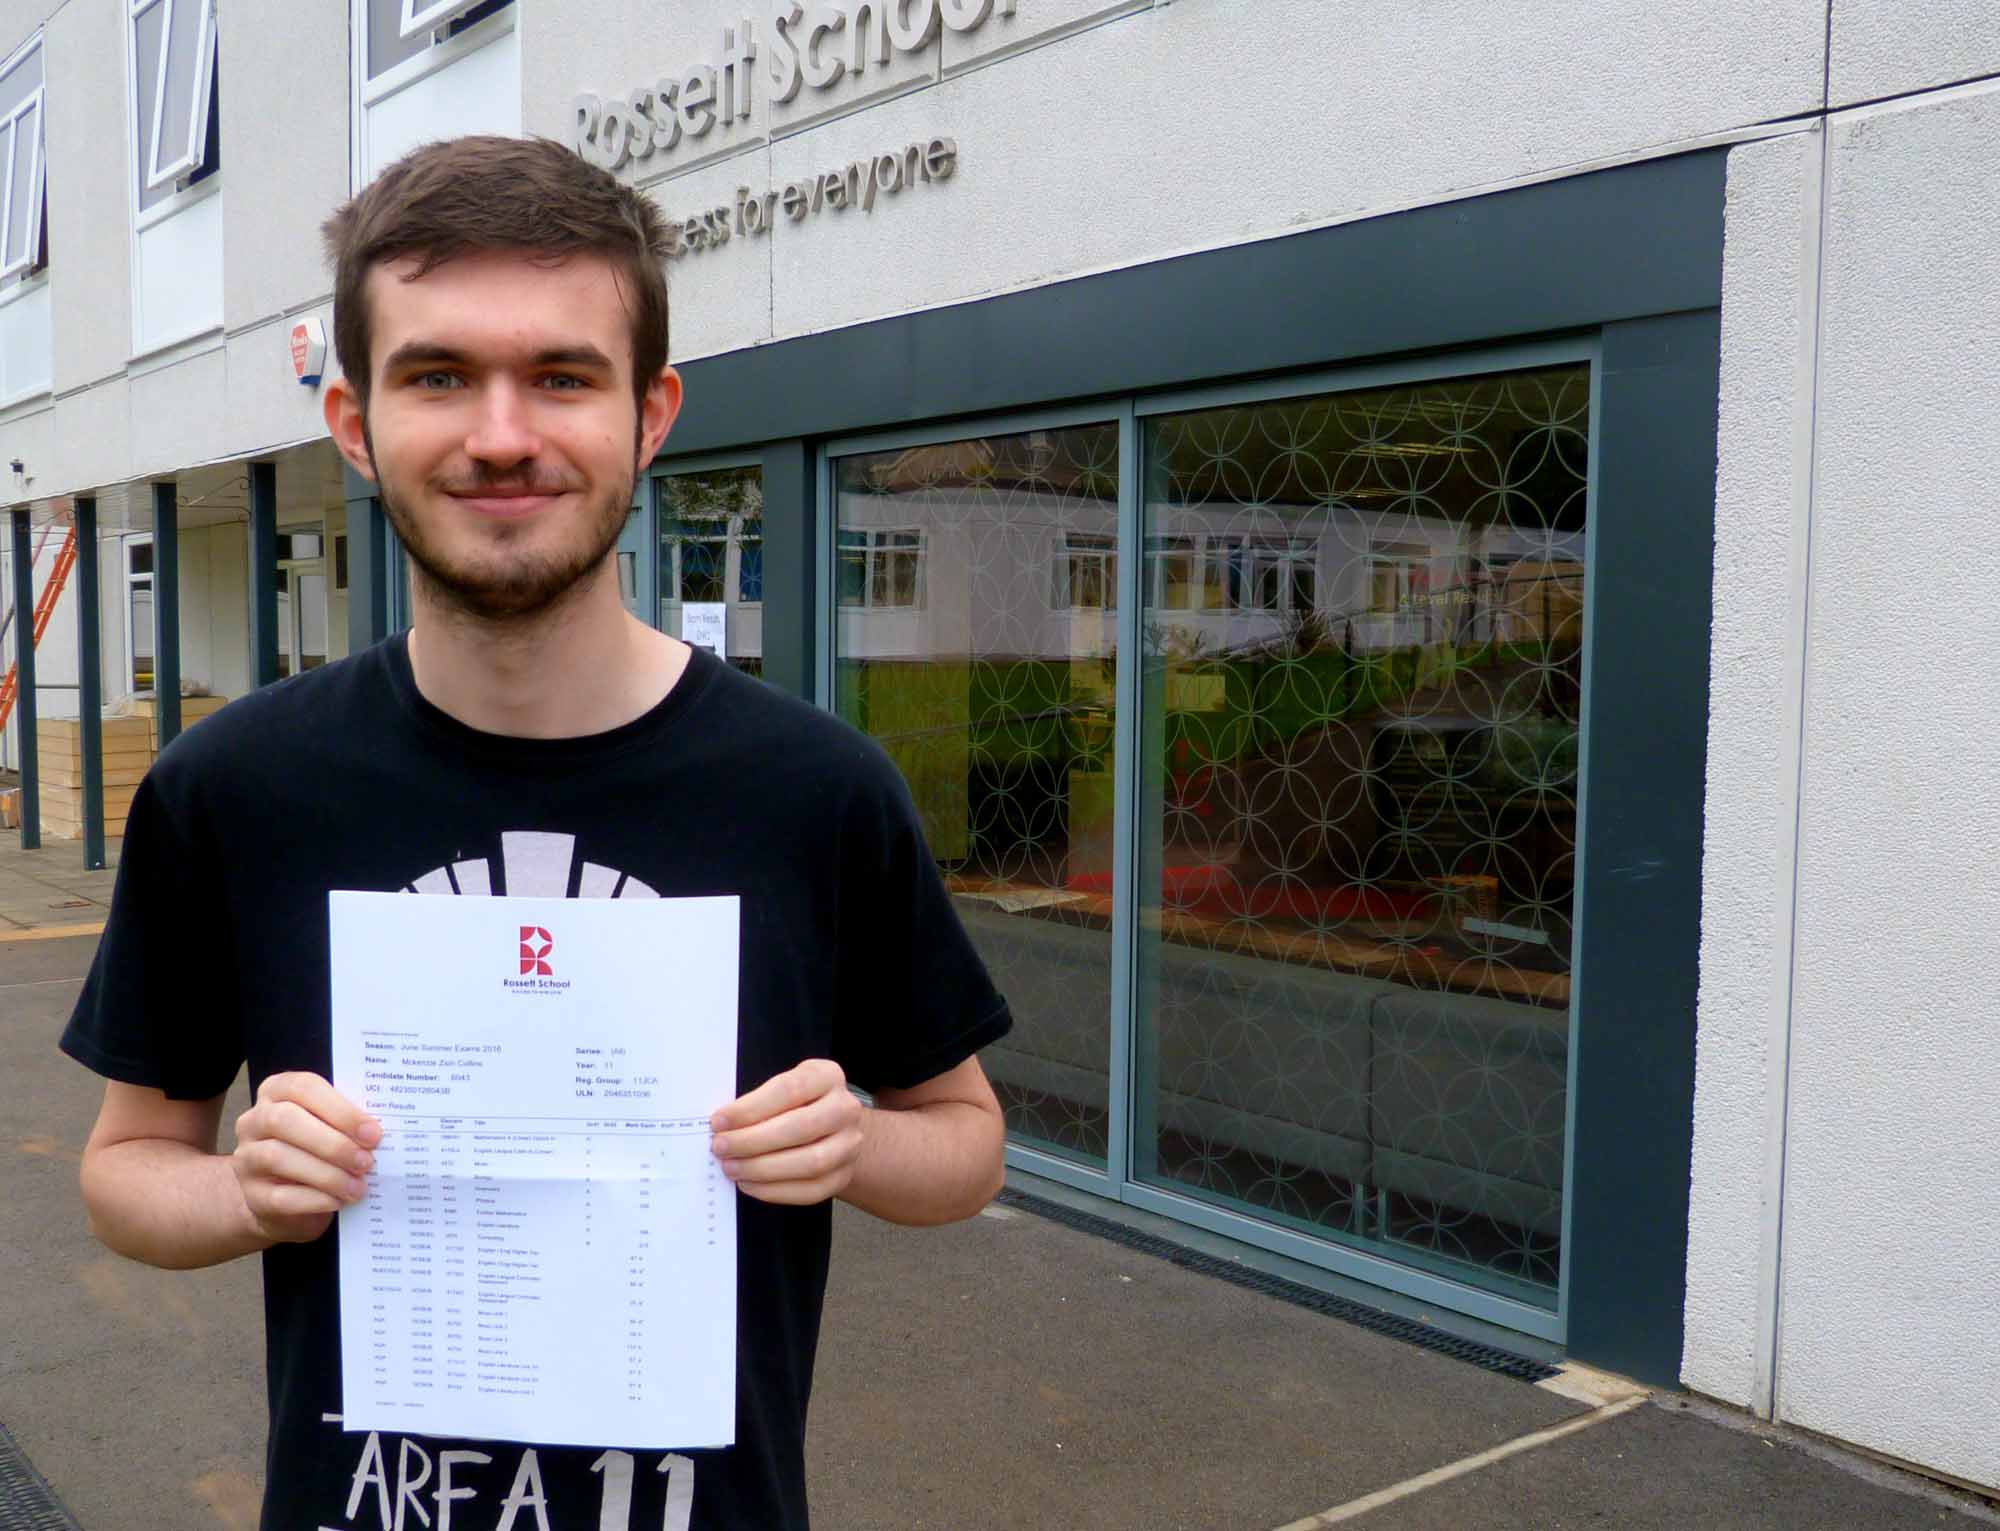 Mckenzie Collins is on track for his planned career in artificial intelligence after earning three A*s, seven As and two Bs in his GCSEs